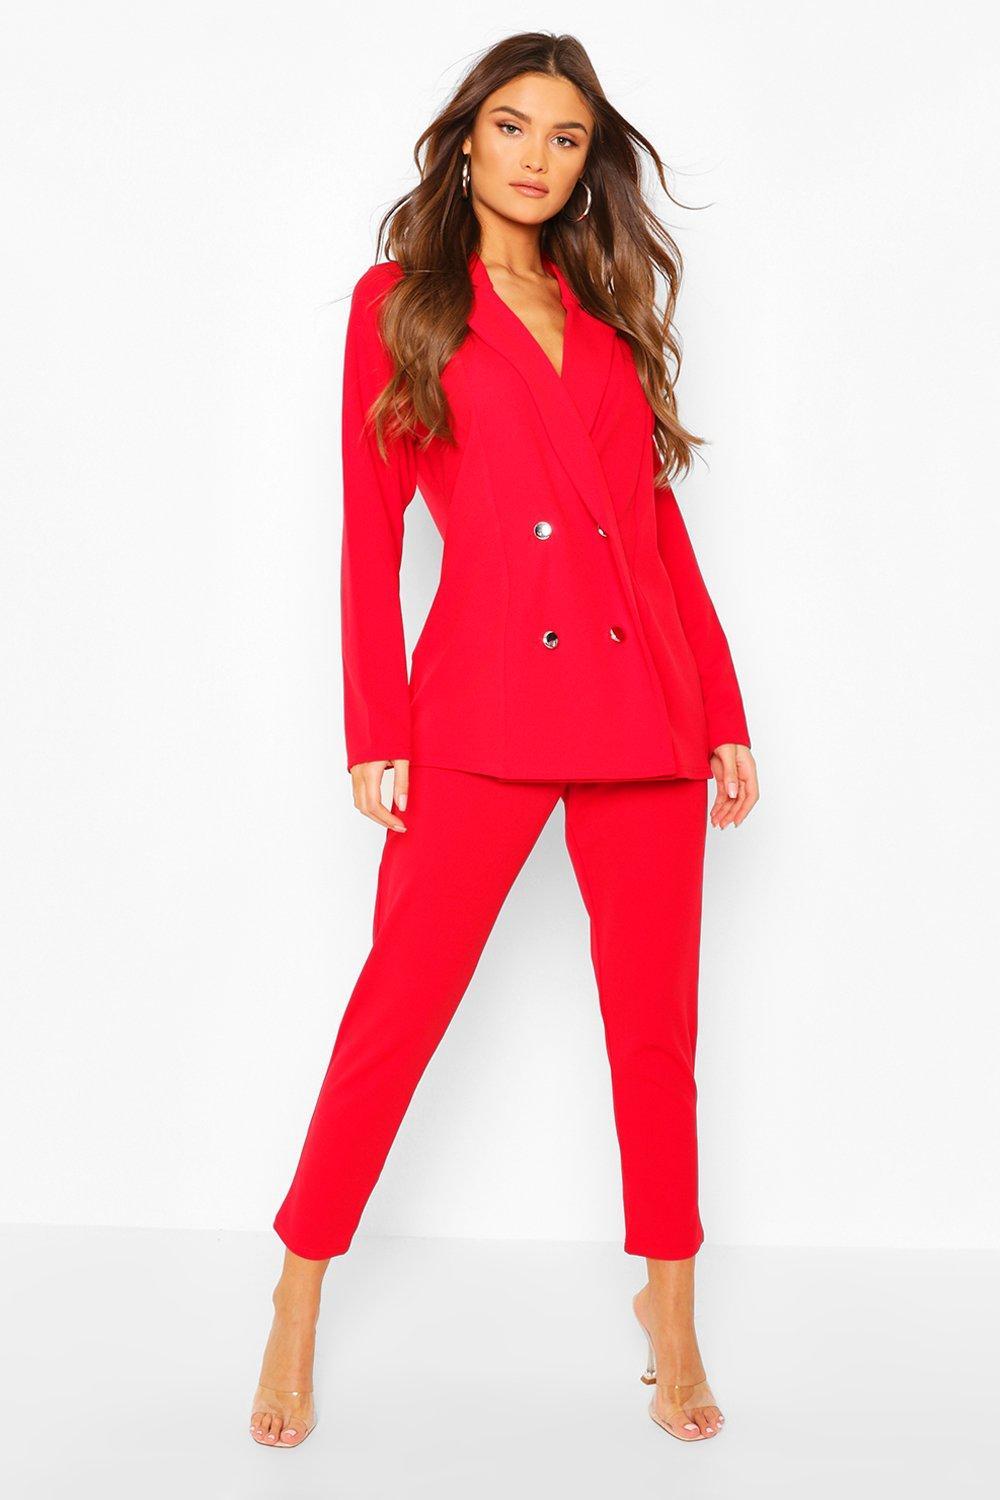 Boohoo Double Breasted Blazer And Pants Suit Set in Red | Lyst